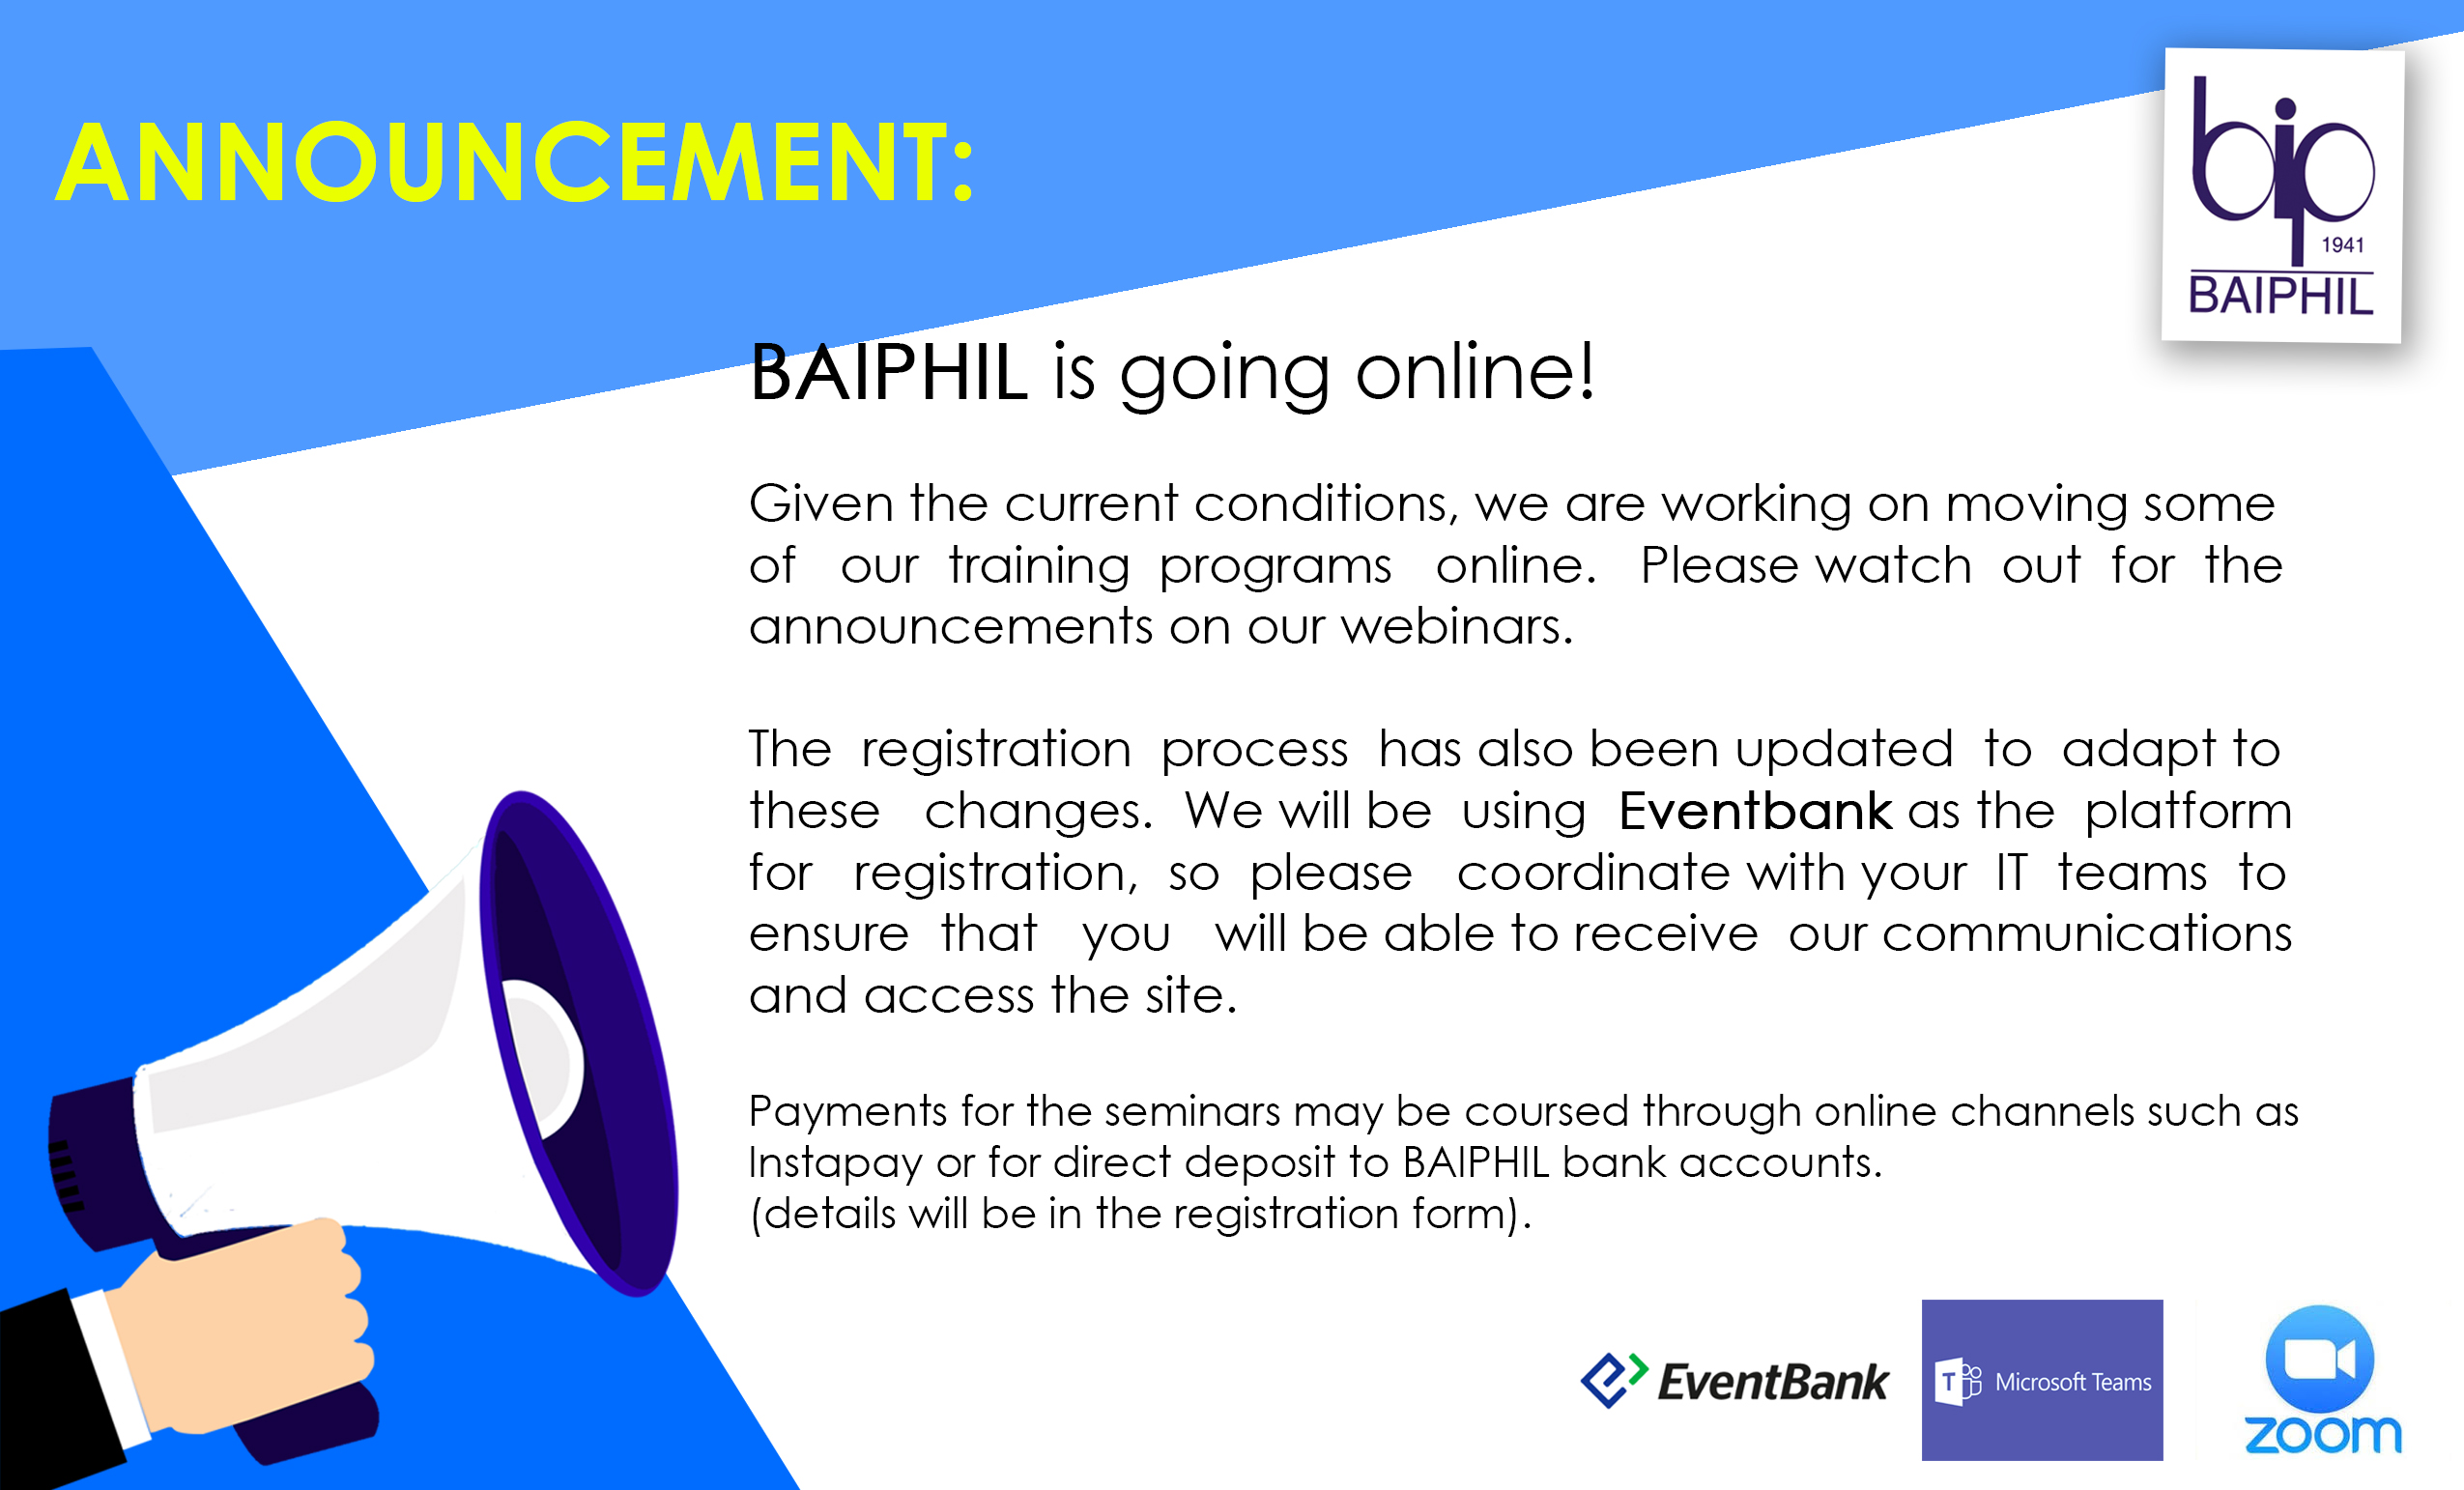 BAIPHIL is going online!